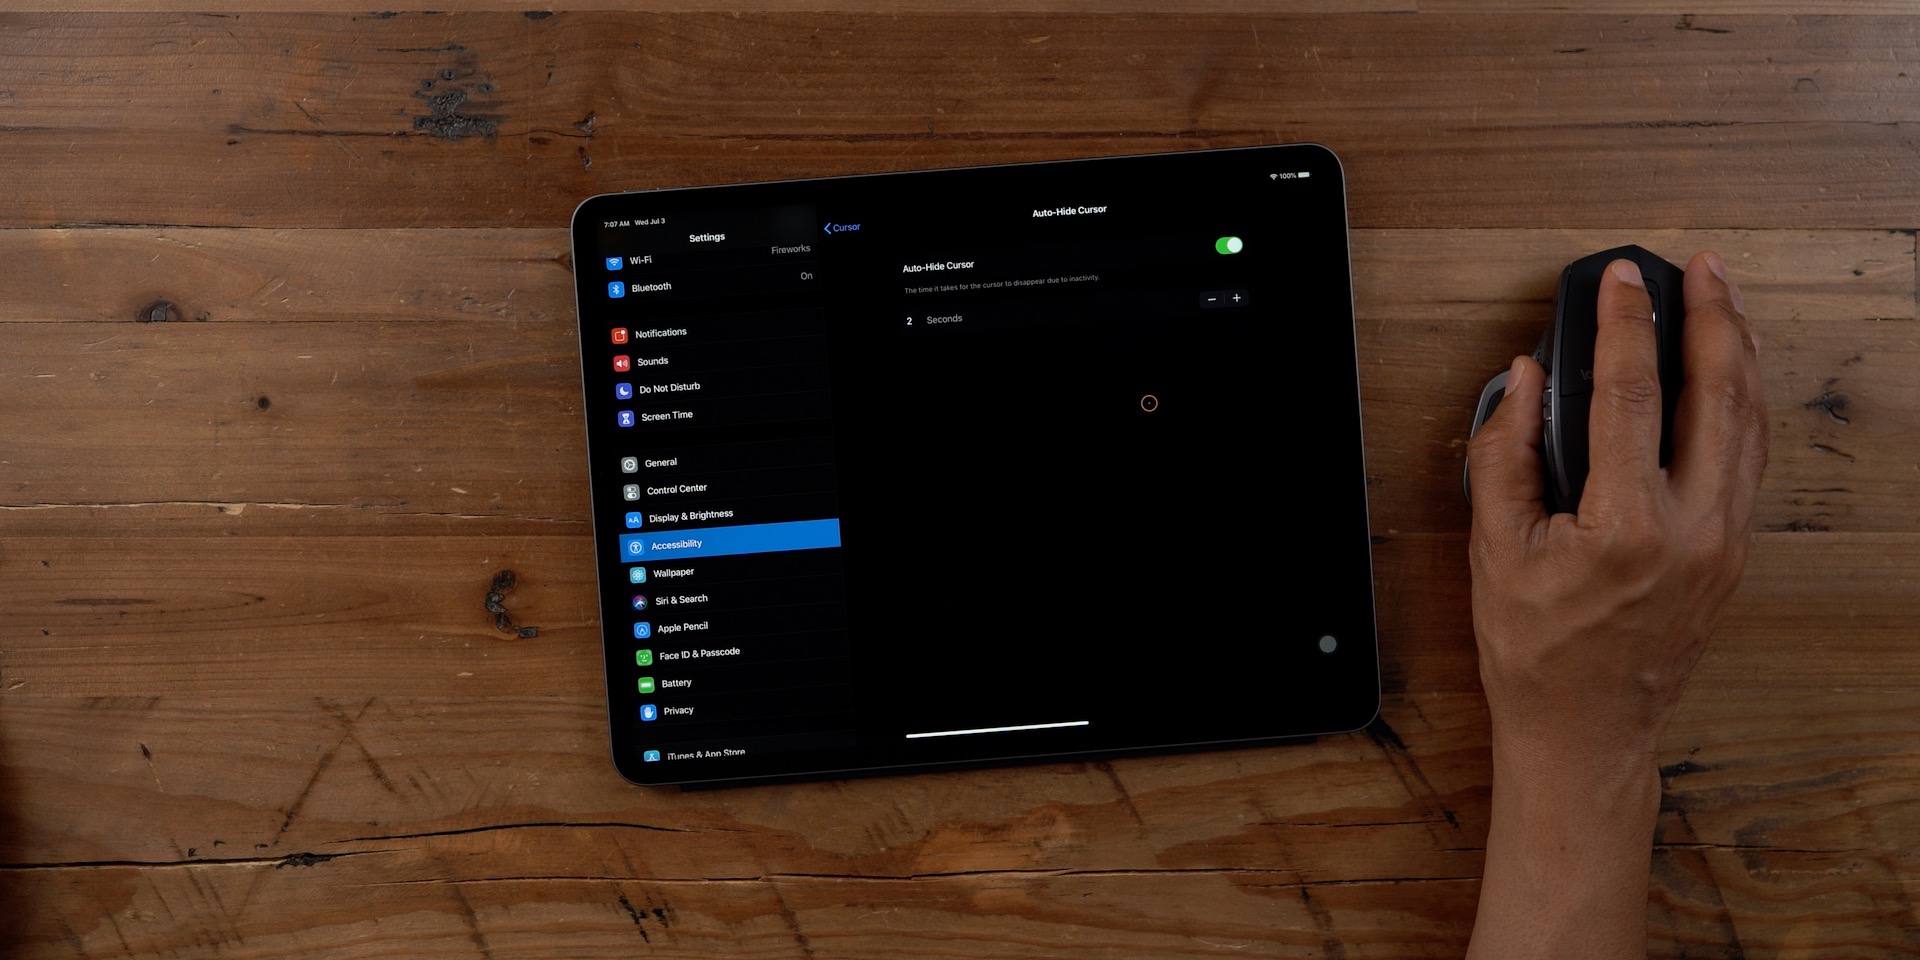 iOS 13 beta 3 changes and features mouse support